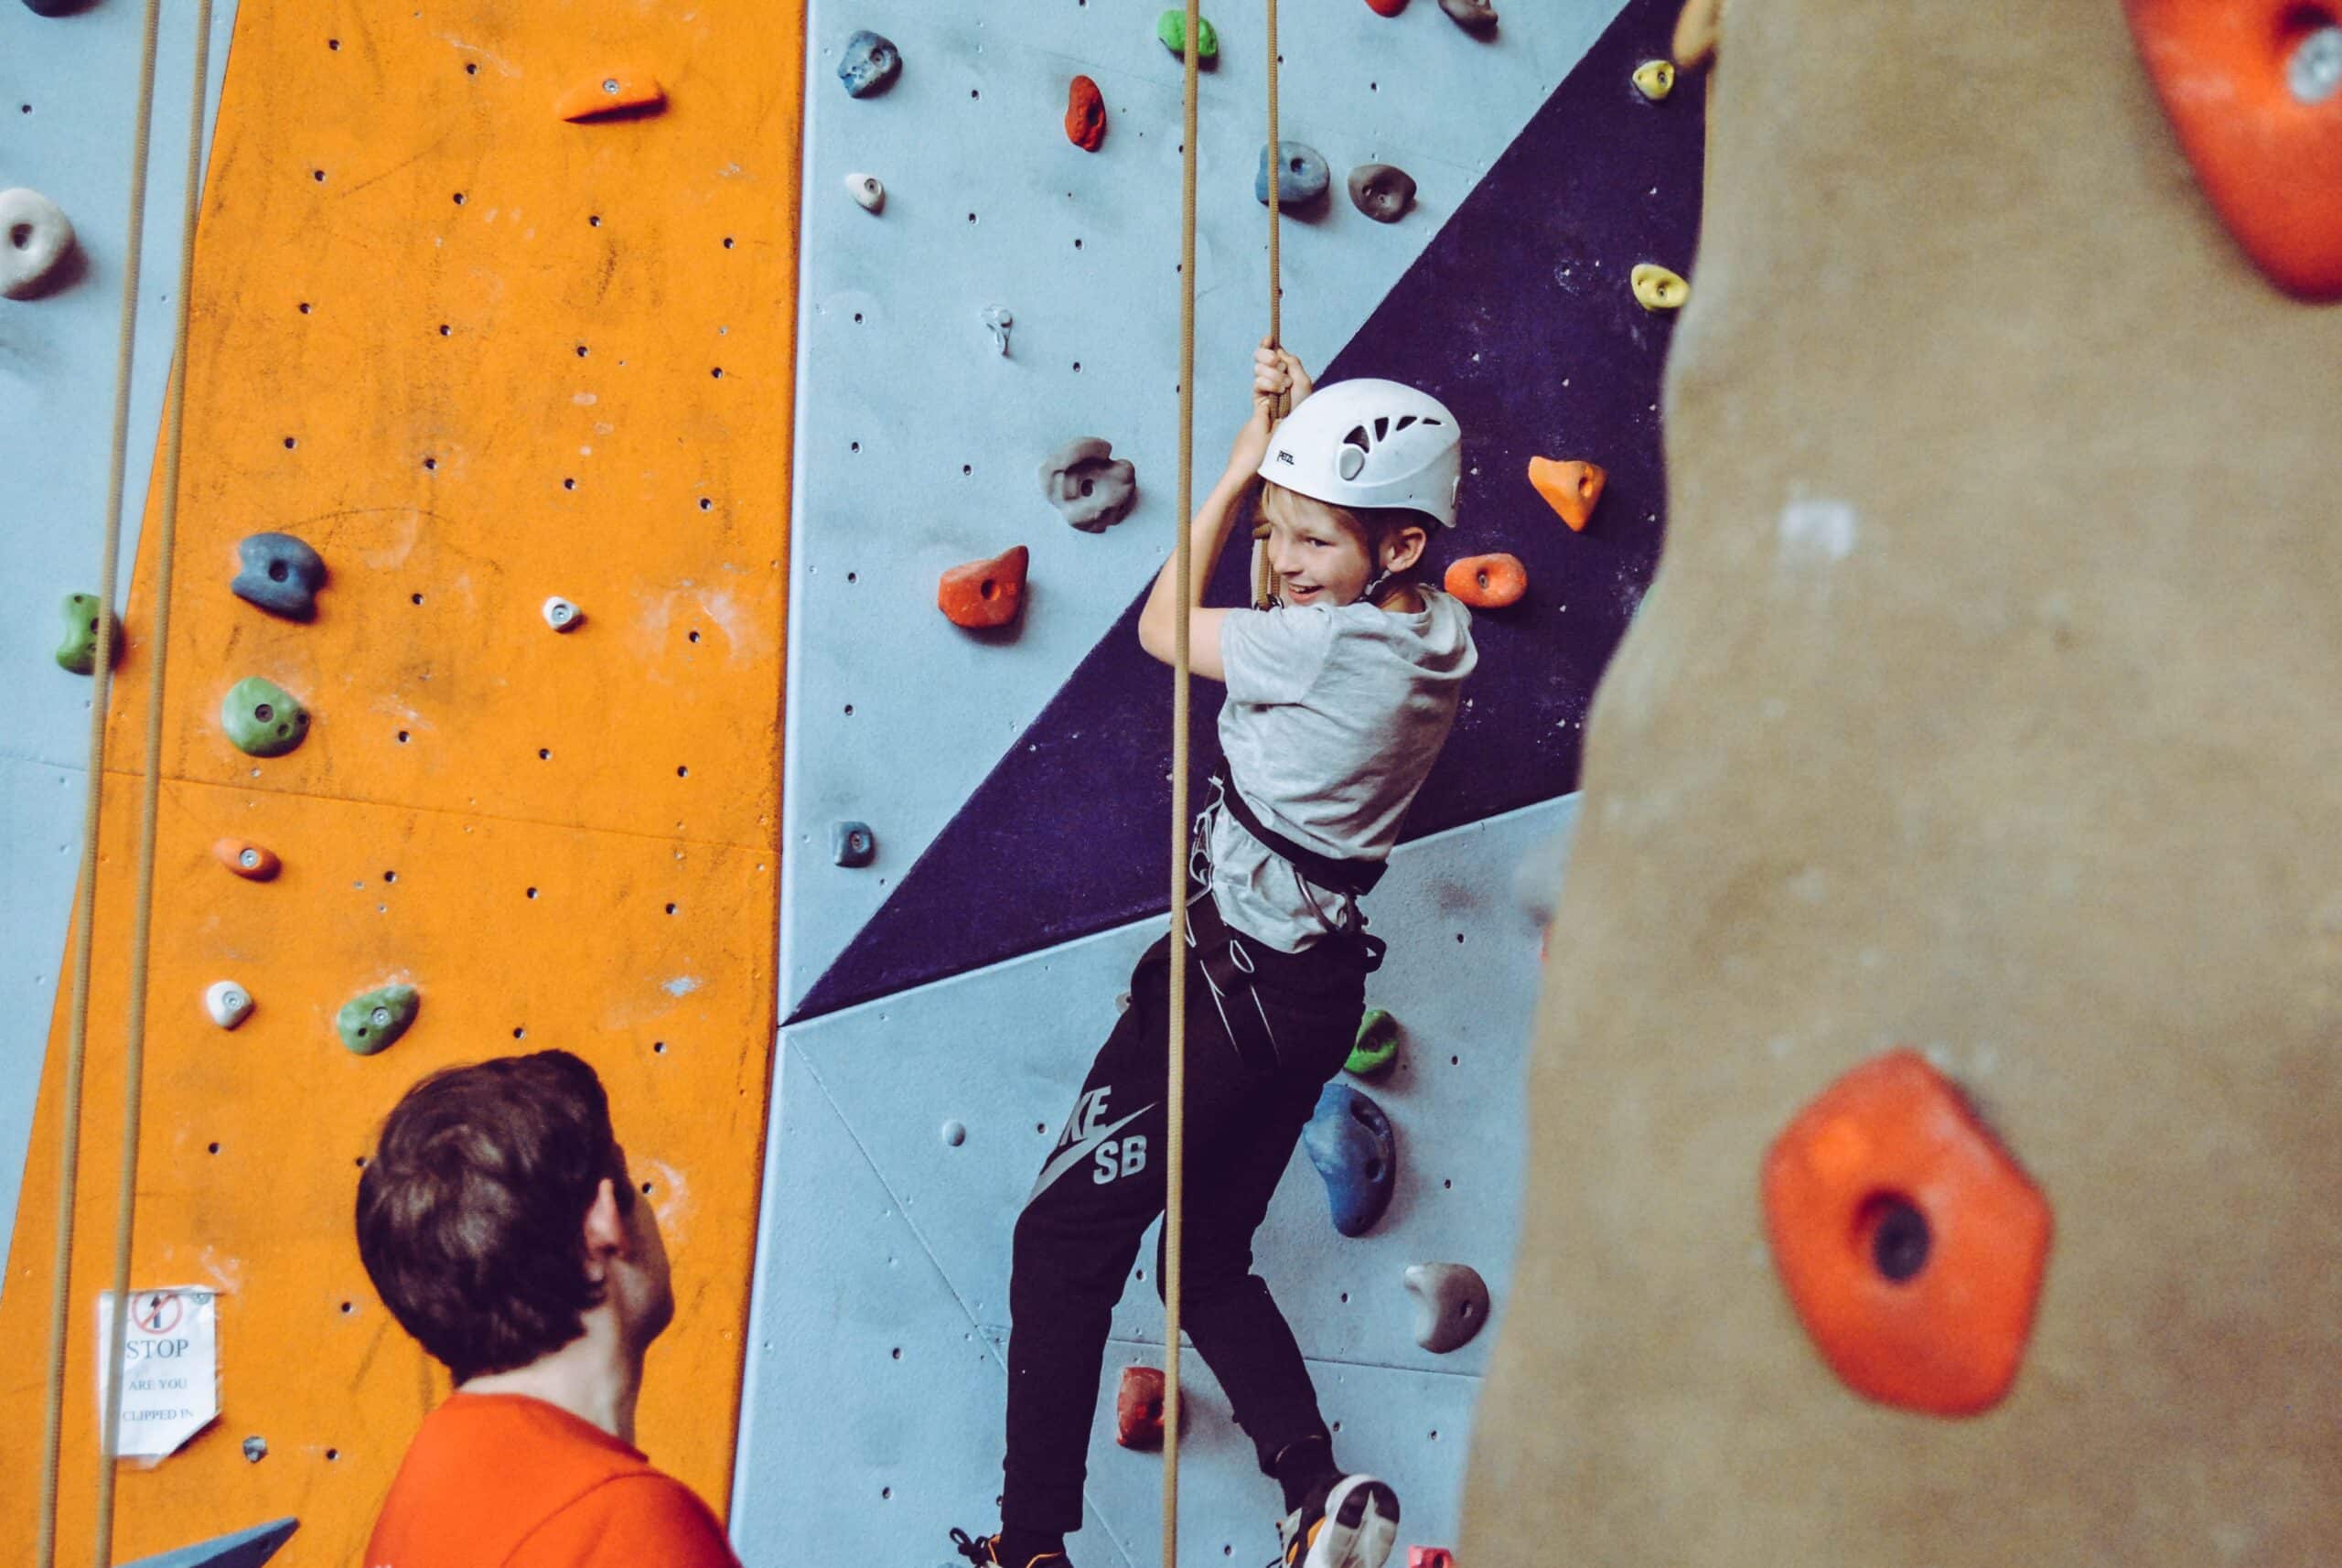 Featured image for “Rock Climbing Wall”